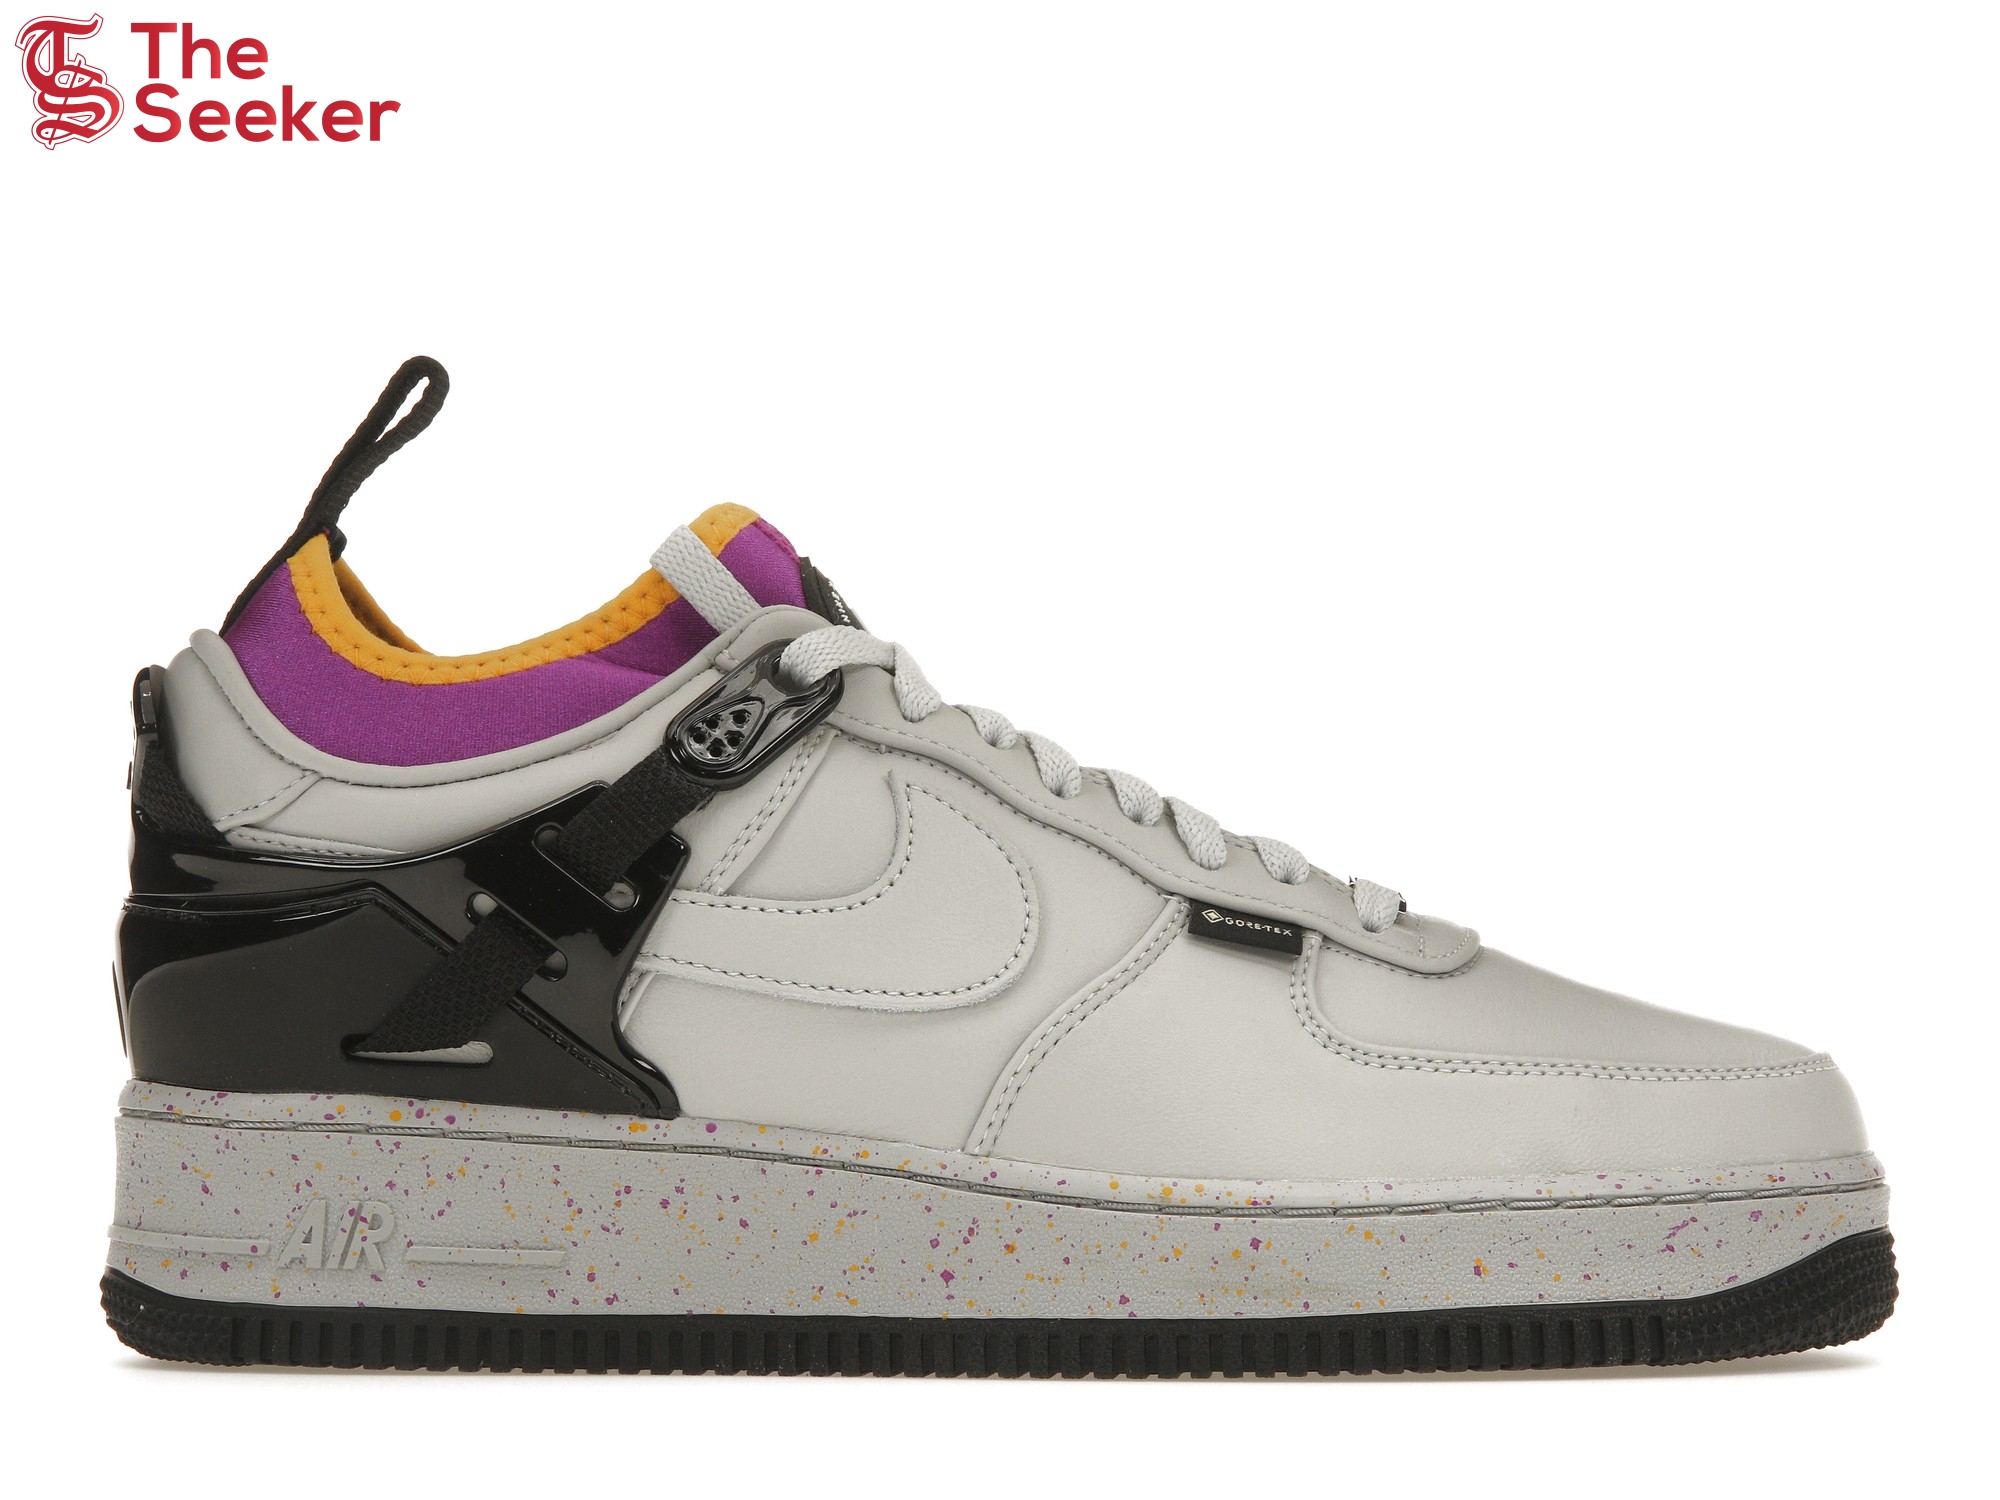 Nike Air Force 1 Low SP Undercover Grey Fog